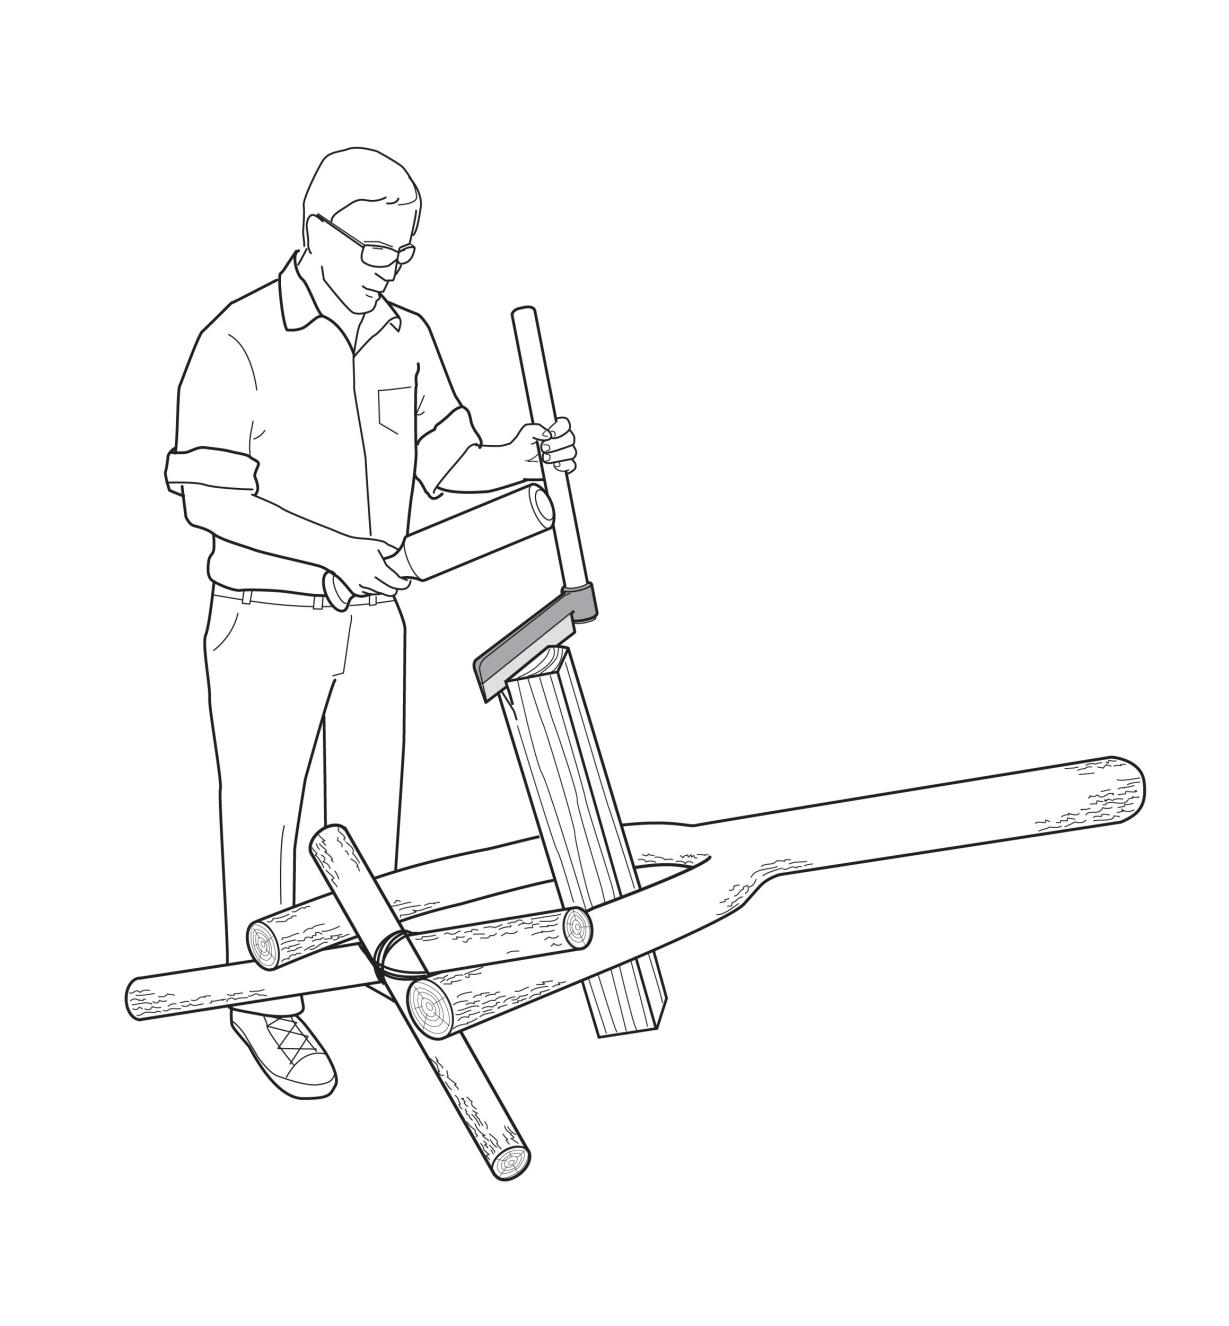 Illustration of a man riving a block of wood that is held in a user-made support